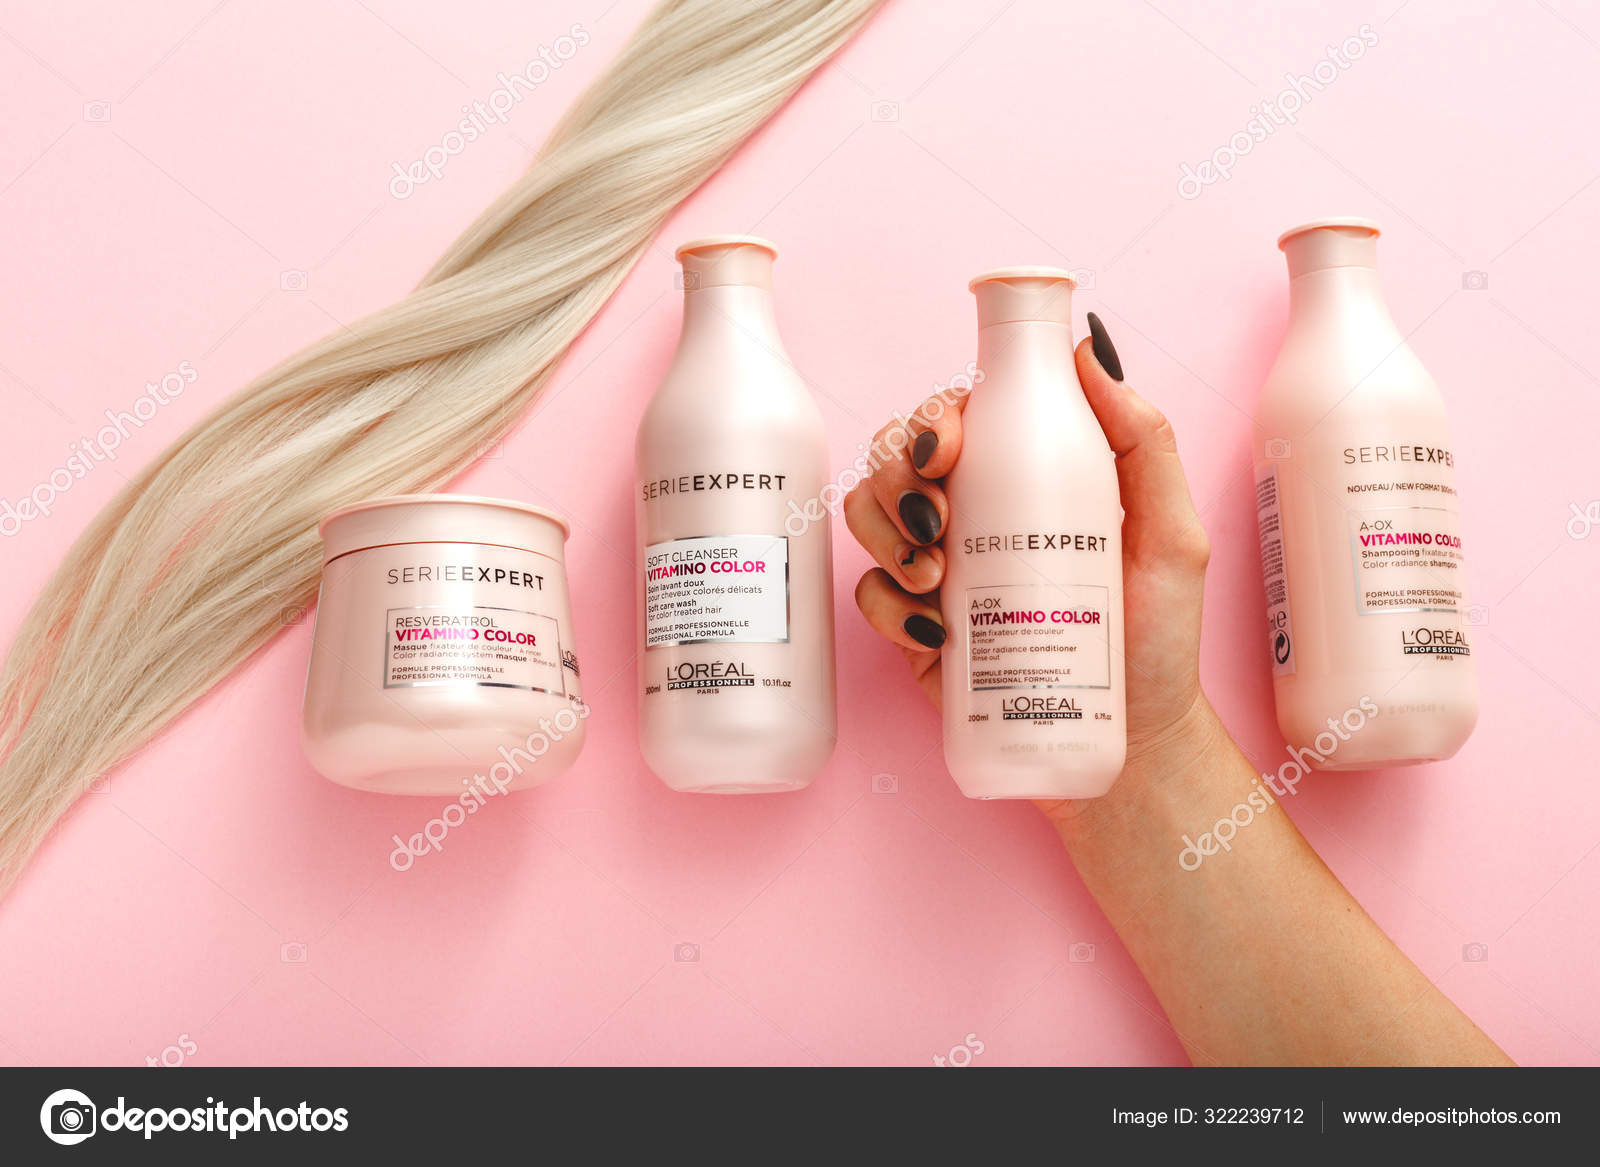 L'oreal professionnel Paris Serie Expert Vitamino Color hair professional set.Loreal shampoo mask.strand of blonde hair on pink background.Pink cosmetics bottles. Flat lay copy space Stock Editorial Photo © beton_studio #